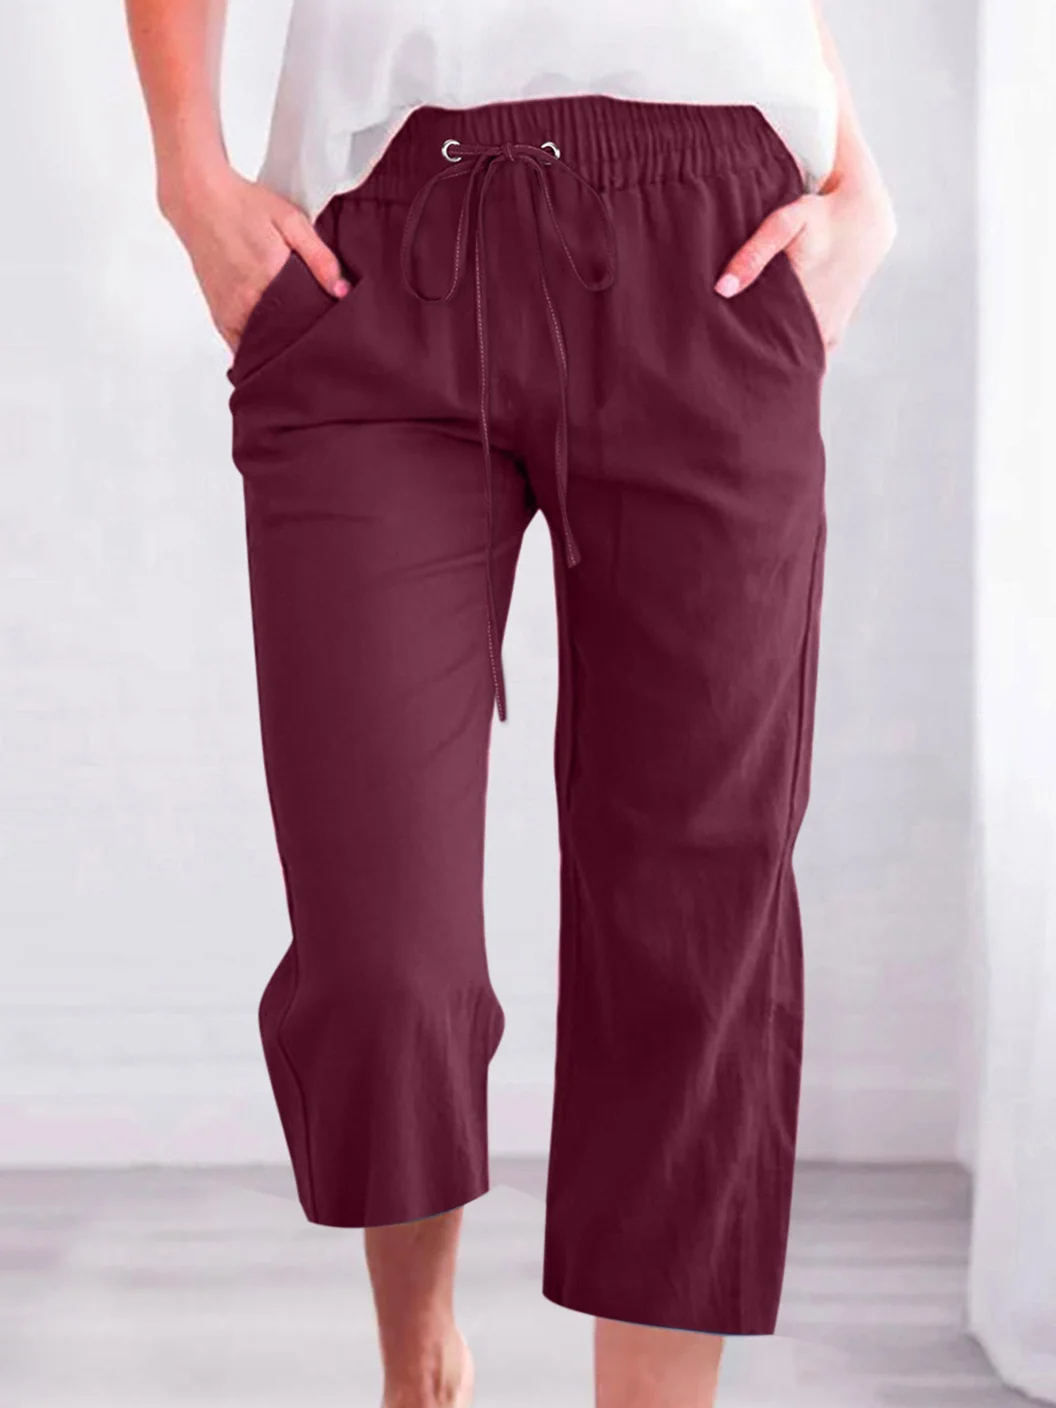 Women's Casual Summer Pants High Waisted Loose Yoga Sweatpants Crop Pants with Pockets